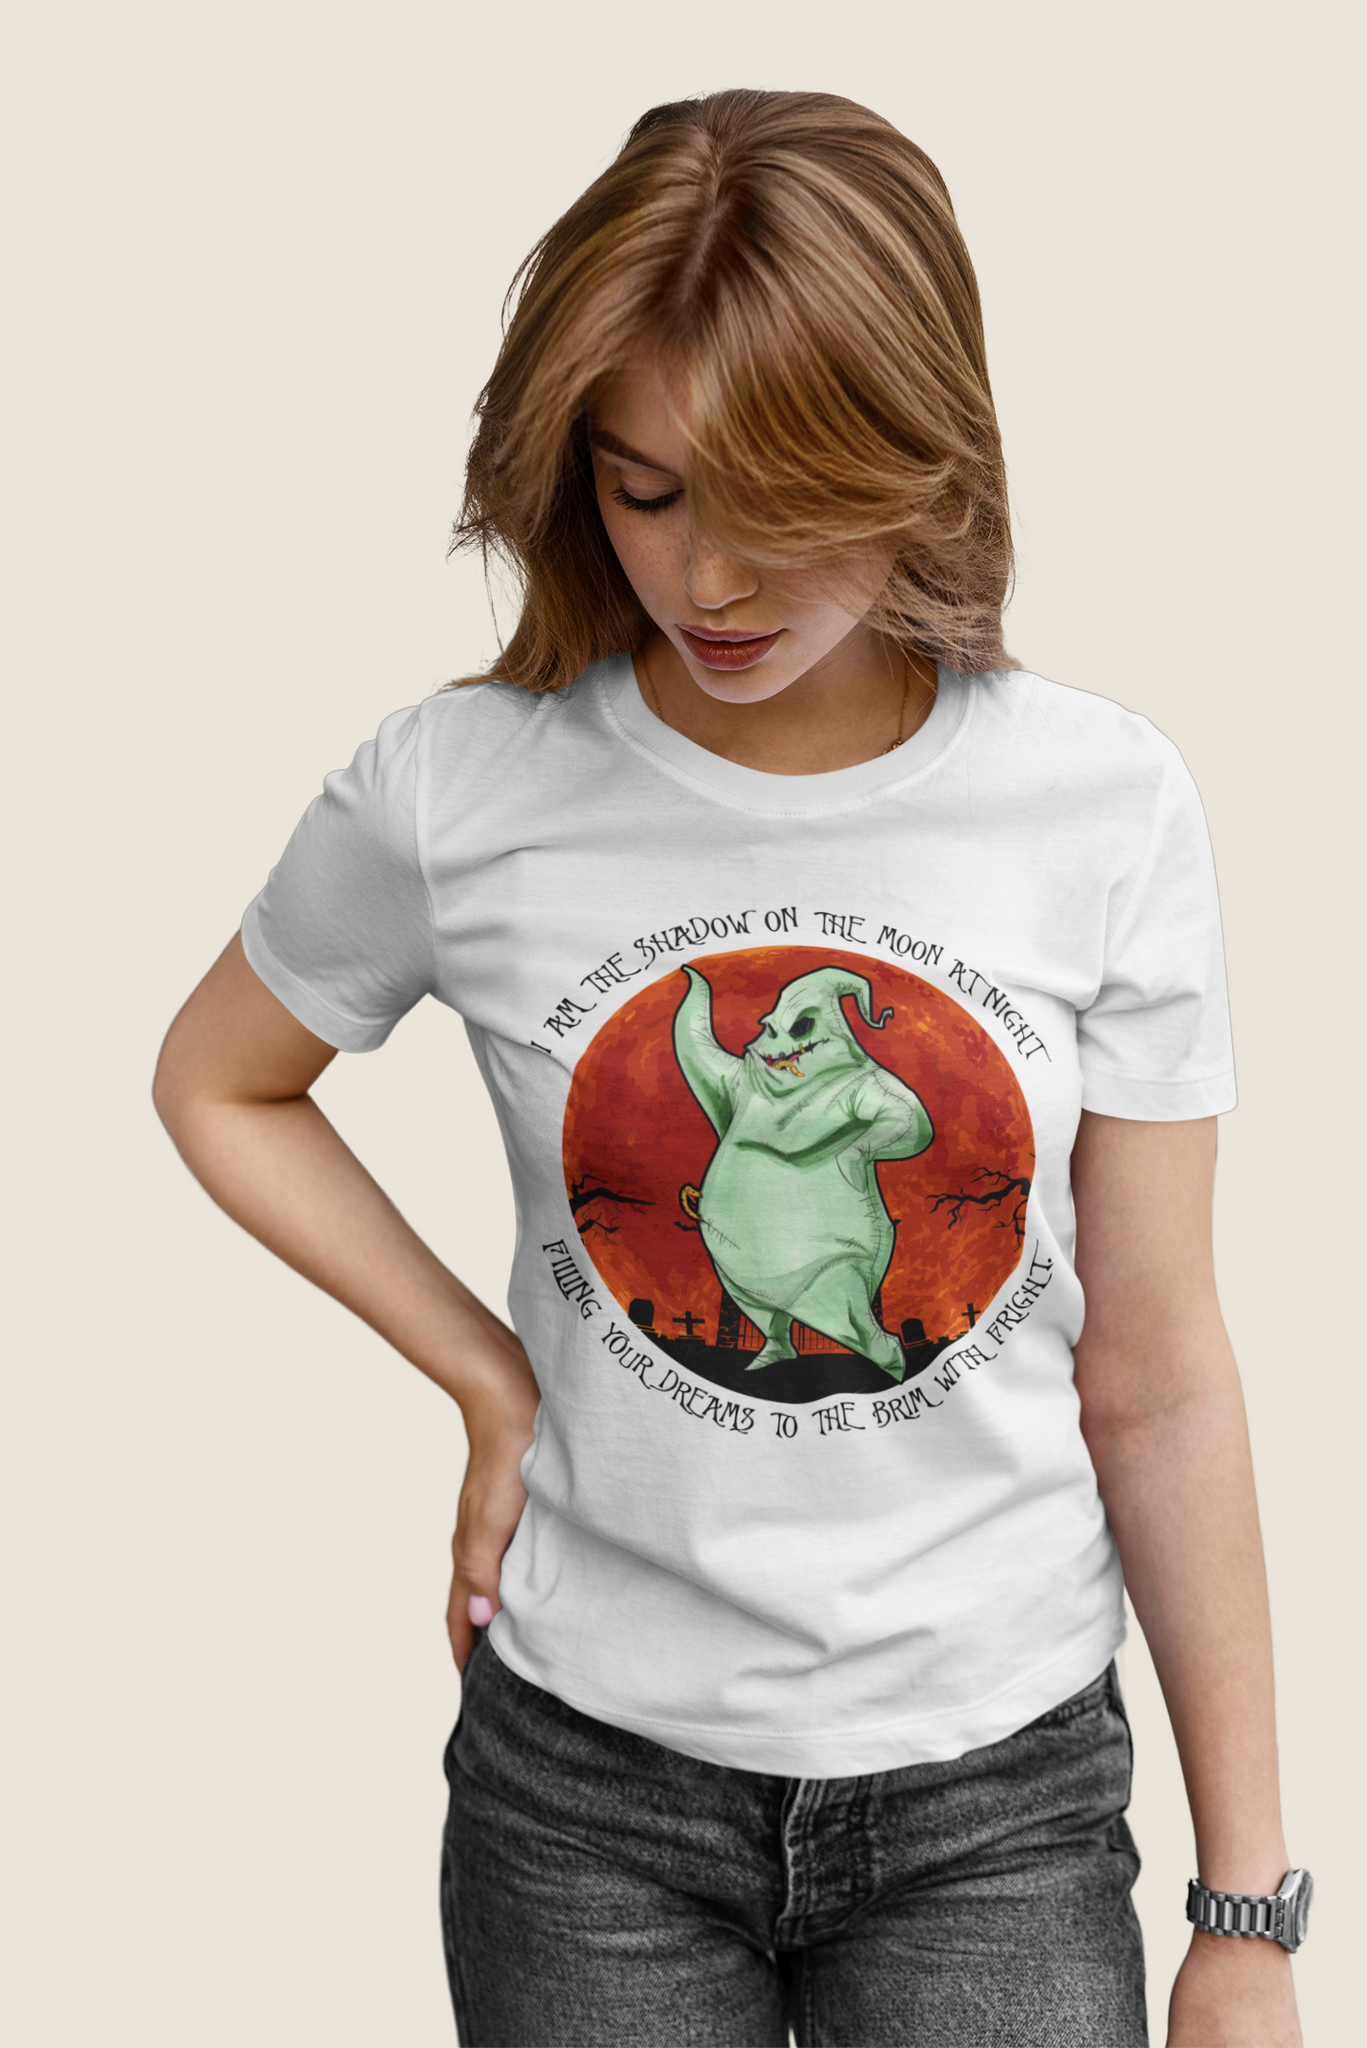 Nightmare Before Christmas T Shirt, Oogie Boogie T Shirt, I Am The Shadow On The Moon At Night Tshirt, Halloween Gifts